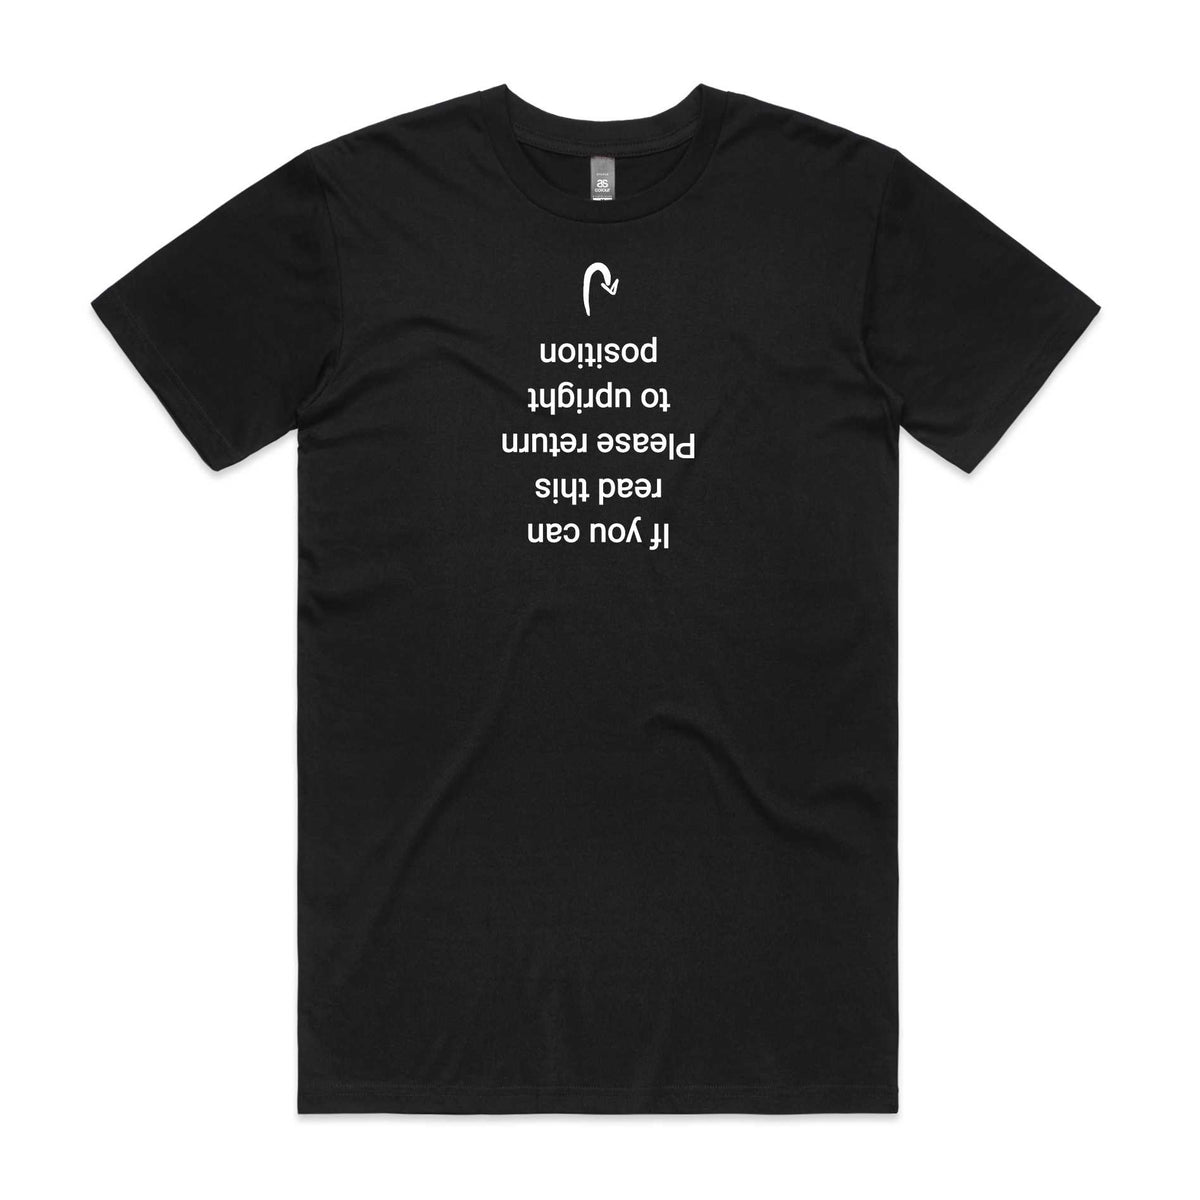 Return to Upright Position T-Shirt